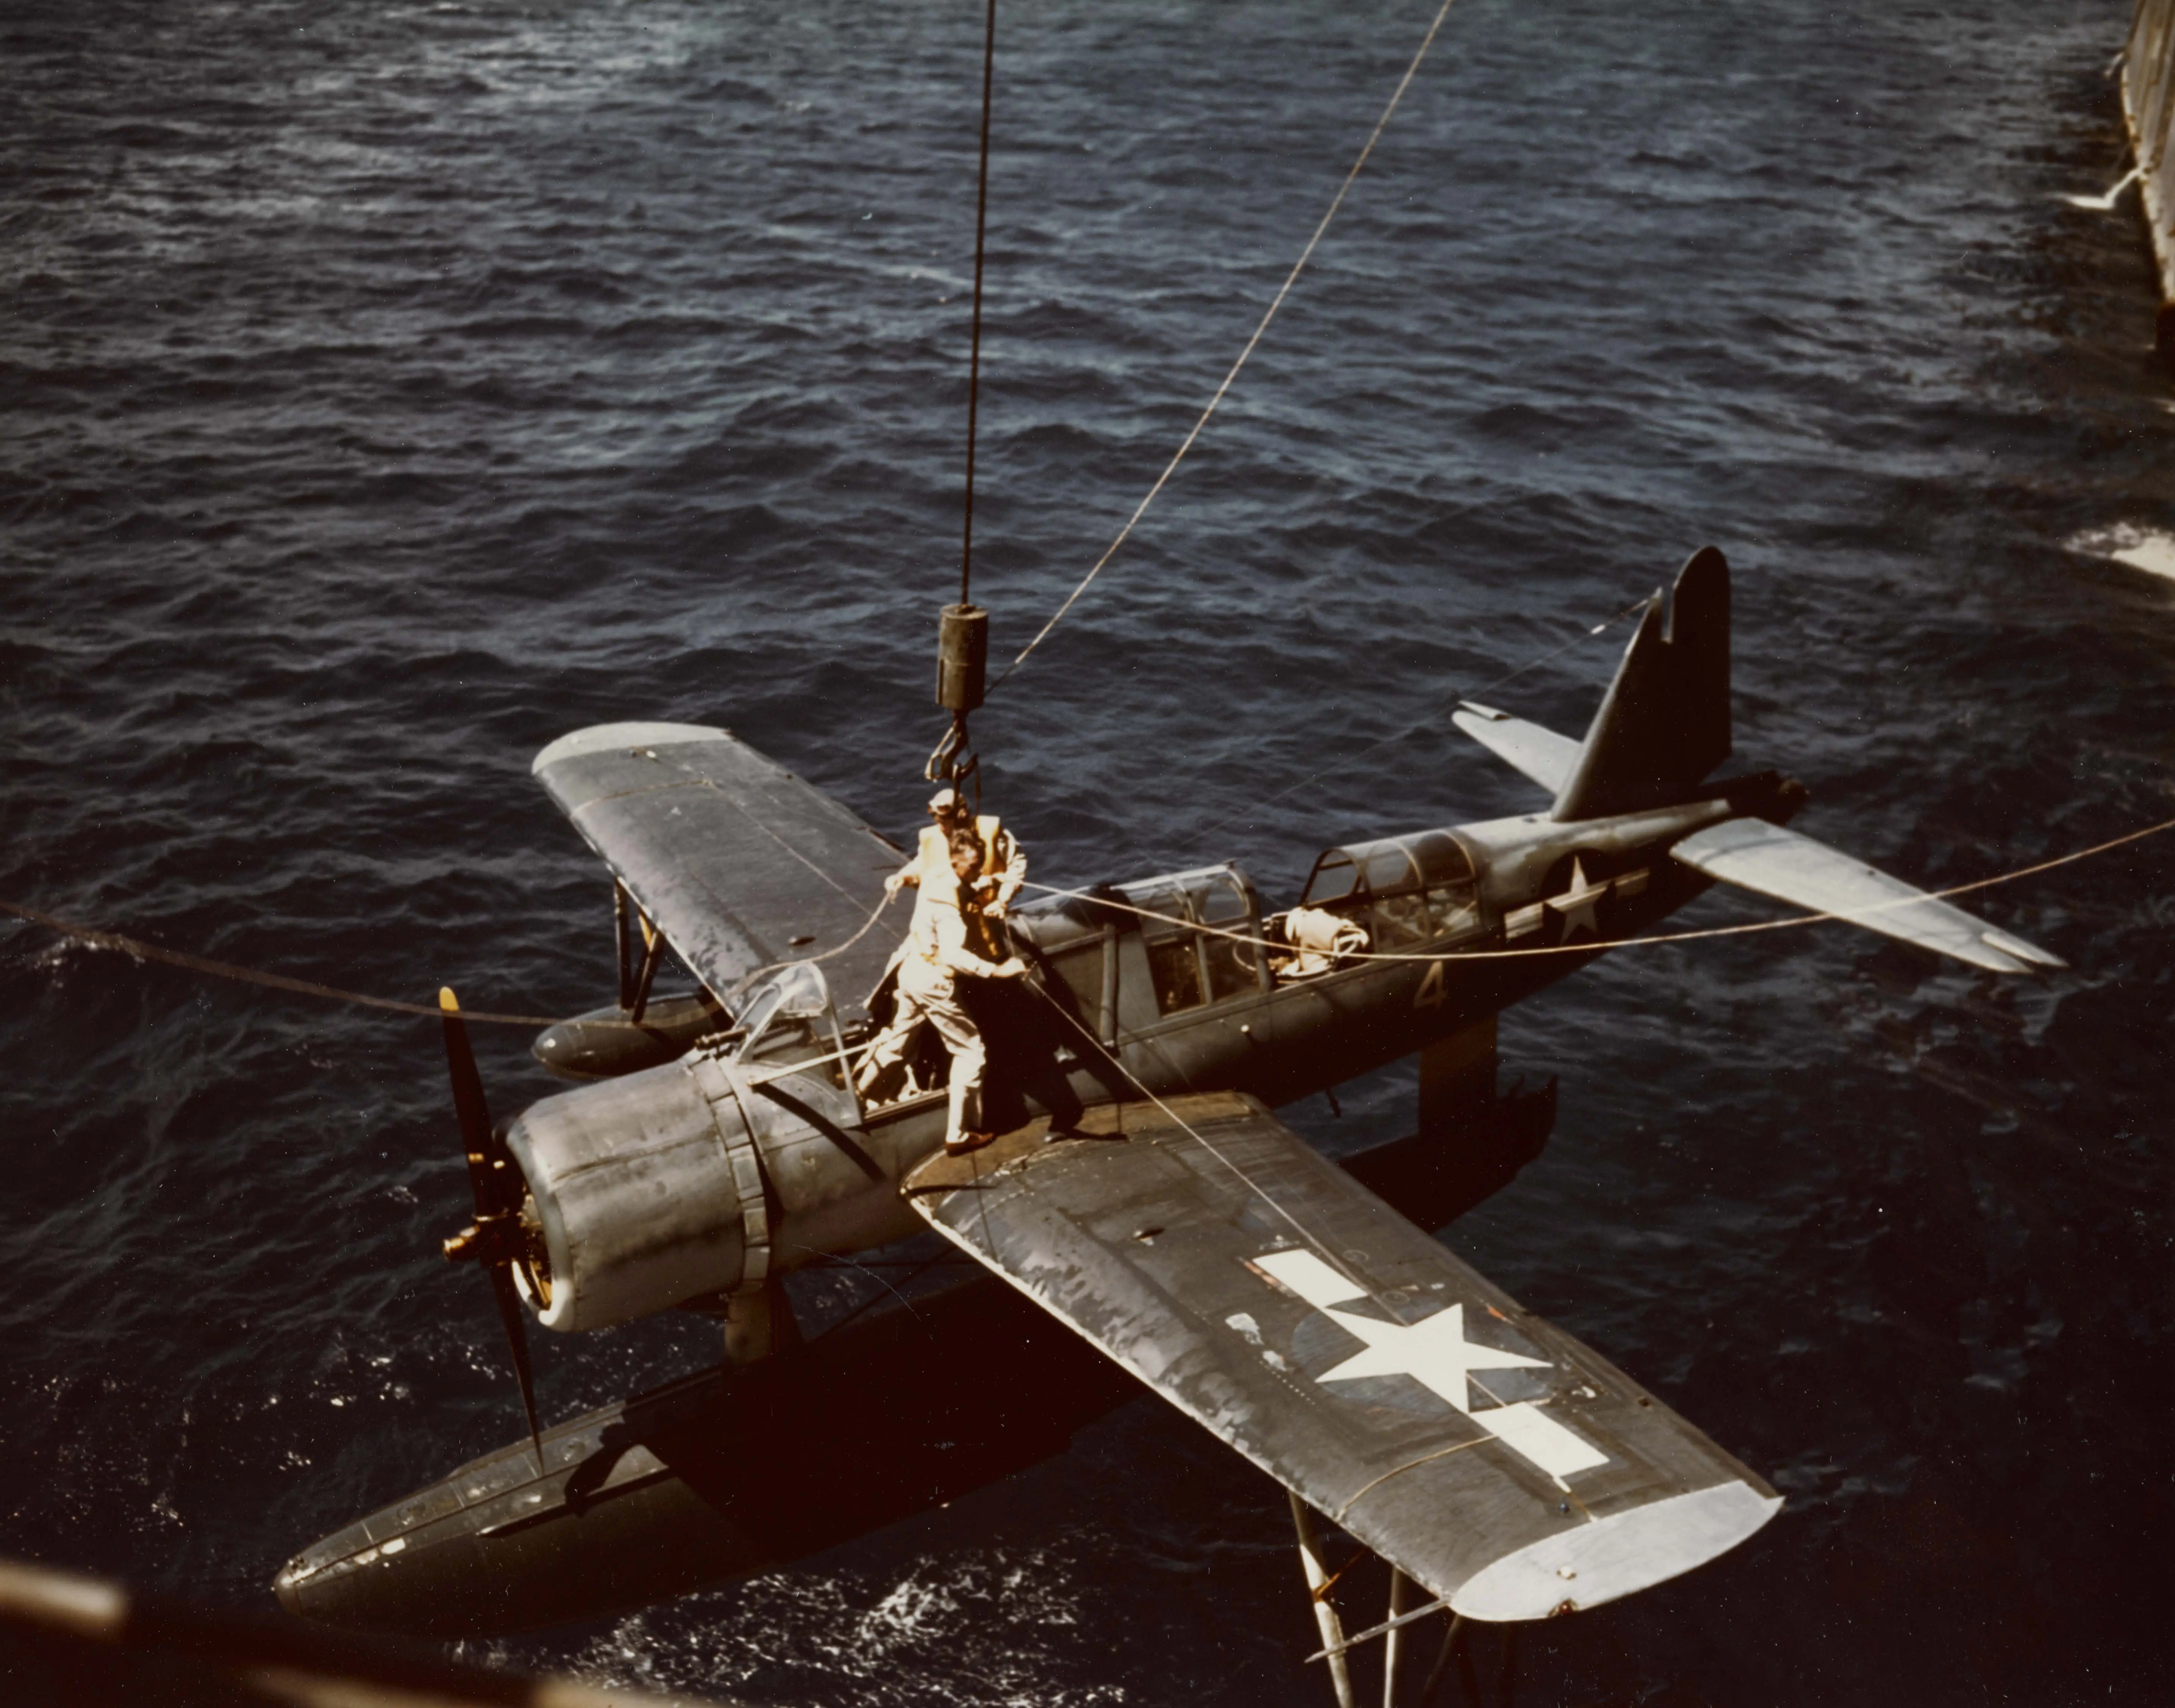 A color photograph of a float plane being lifted out of the water by a crane. The pilot and copilot have climbed out of the plane and are securing the plane to the crane hook.